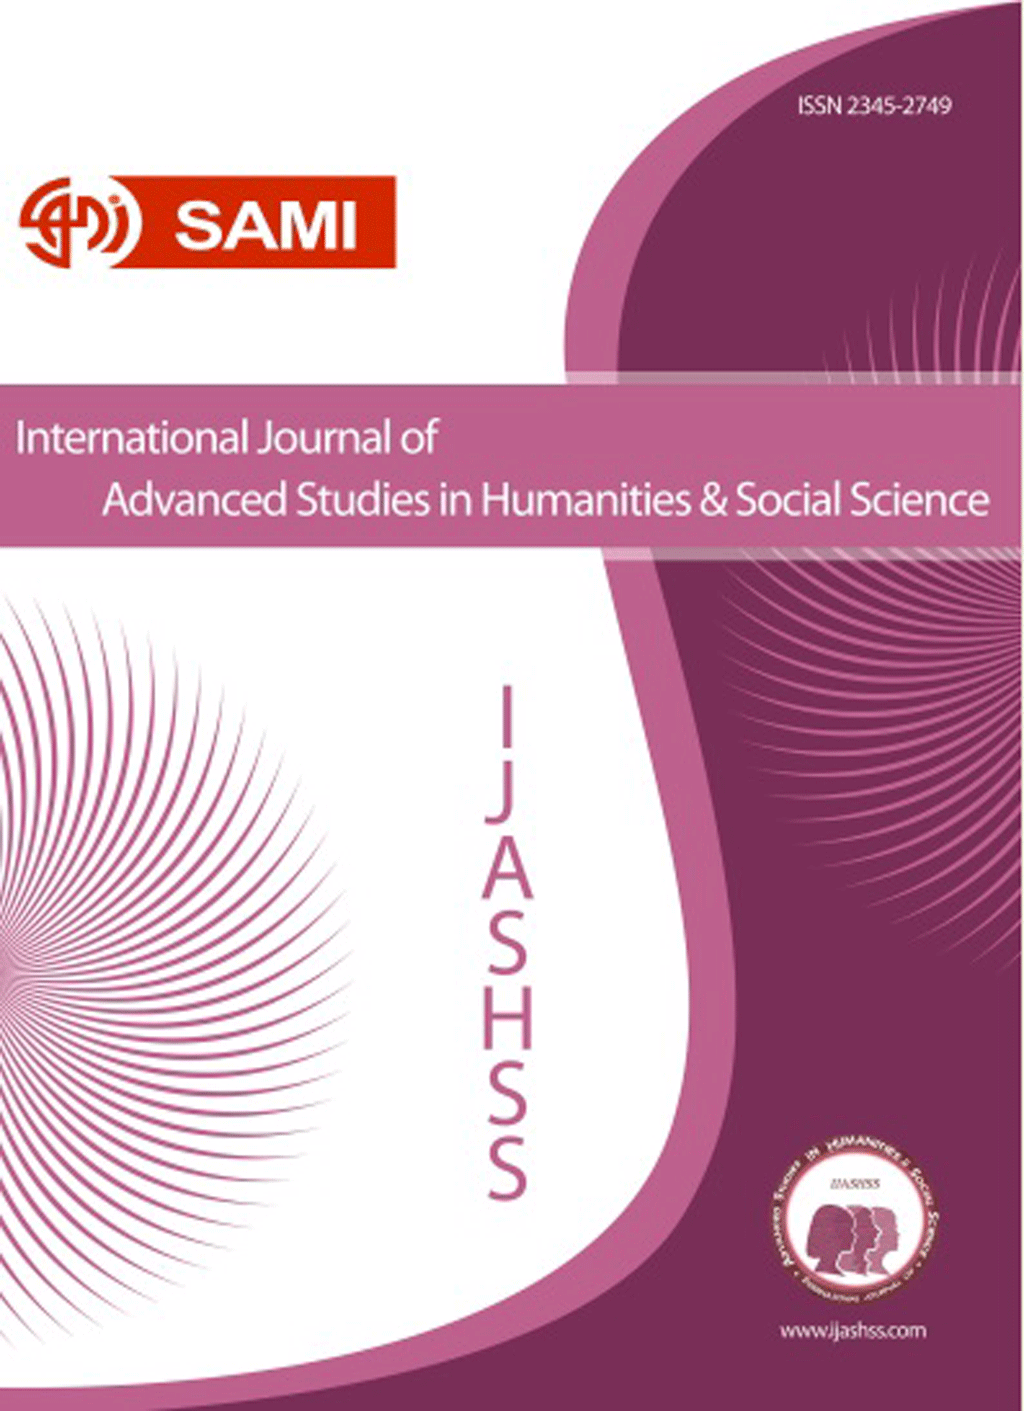 International Journal of Advanced Studies in Humanities and Social Science - August 2021, Volume 10 - Issue 4